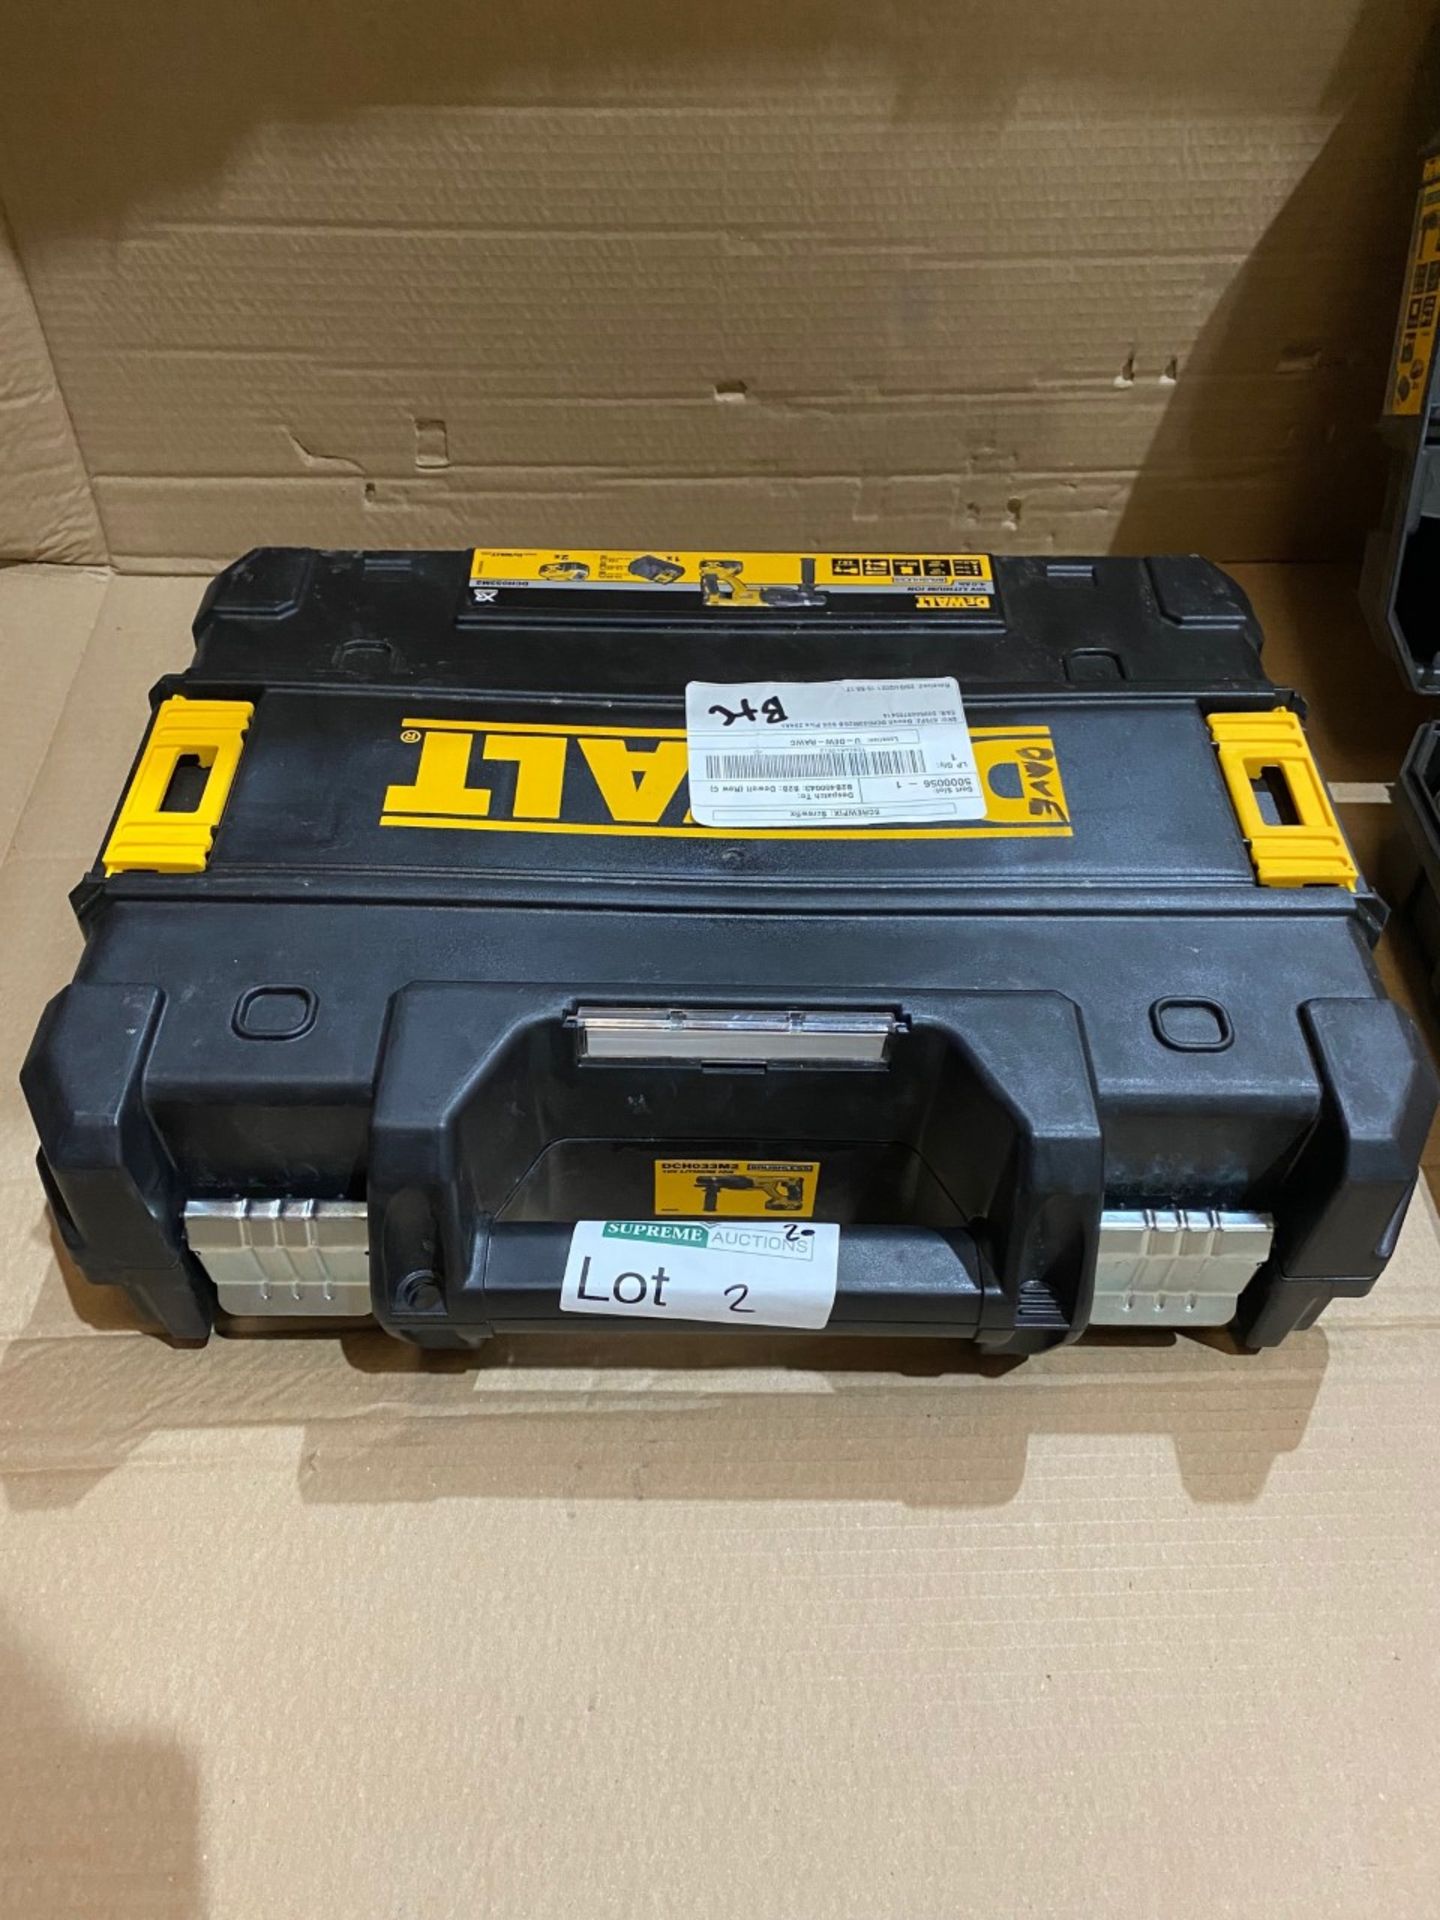 DEWALT DCH033 3KG 18V 4.0AH LI-ION XR BRUSHLESS CORDLESS SDS PLUS DRILL. COMES WITH BATTERY, CHARGER - Image 2 of 2